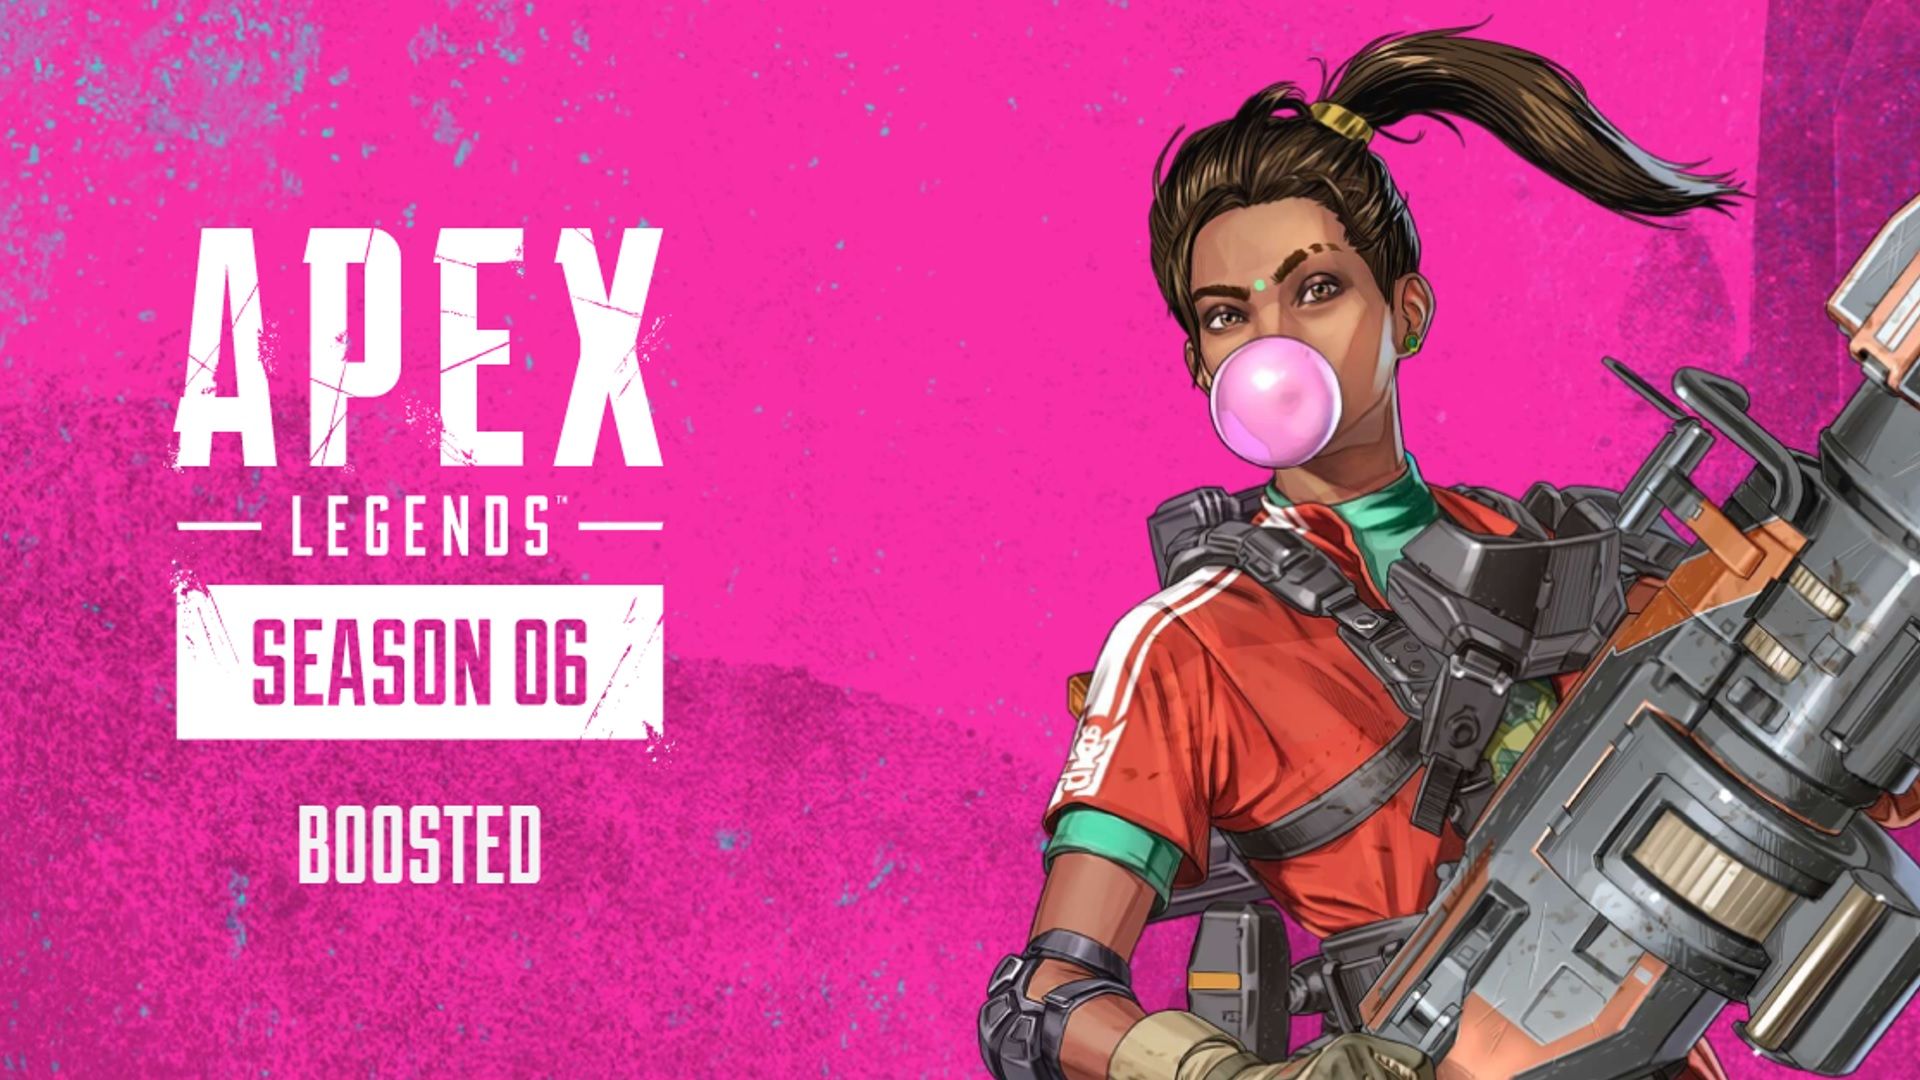 Everything coming to Apex Legends in Season 6: Boosted